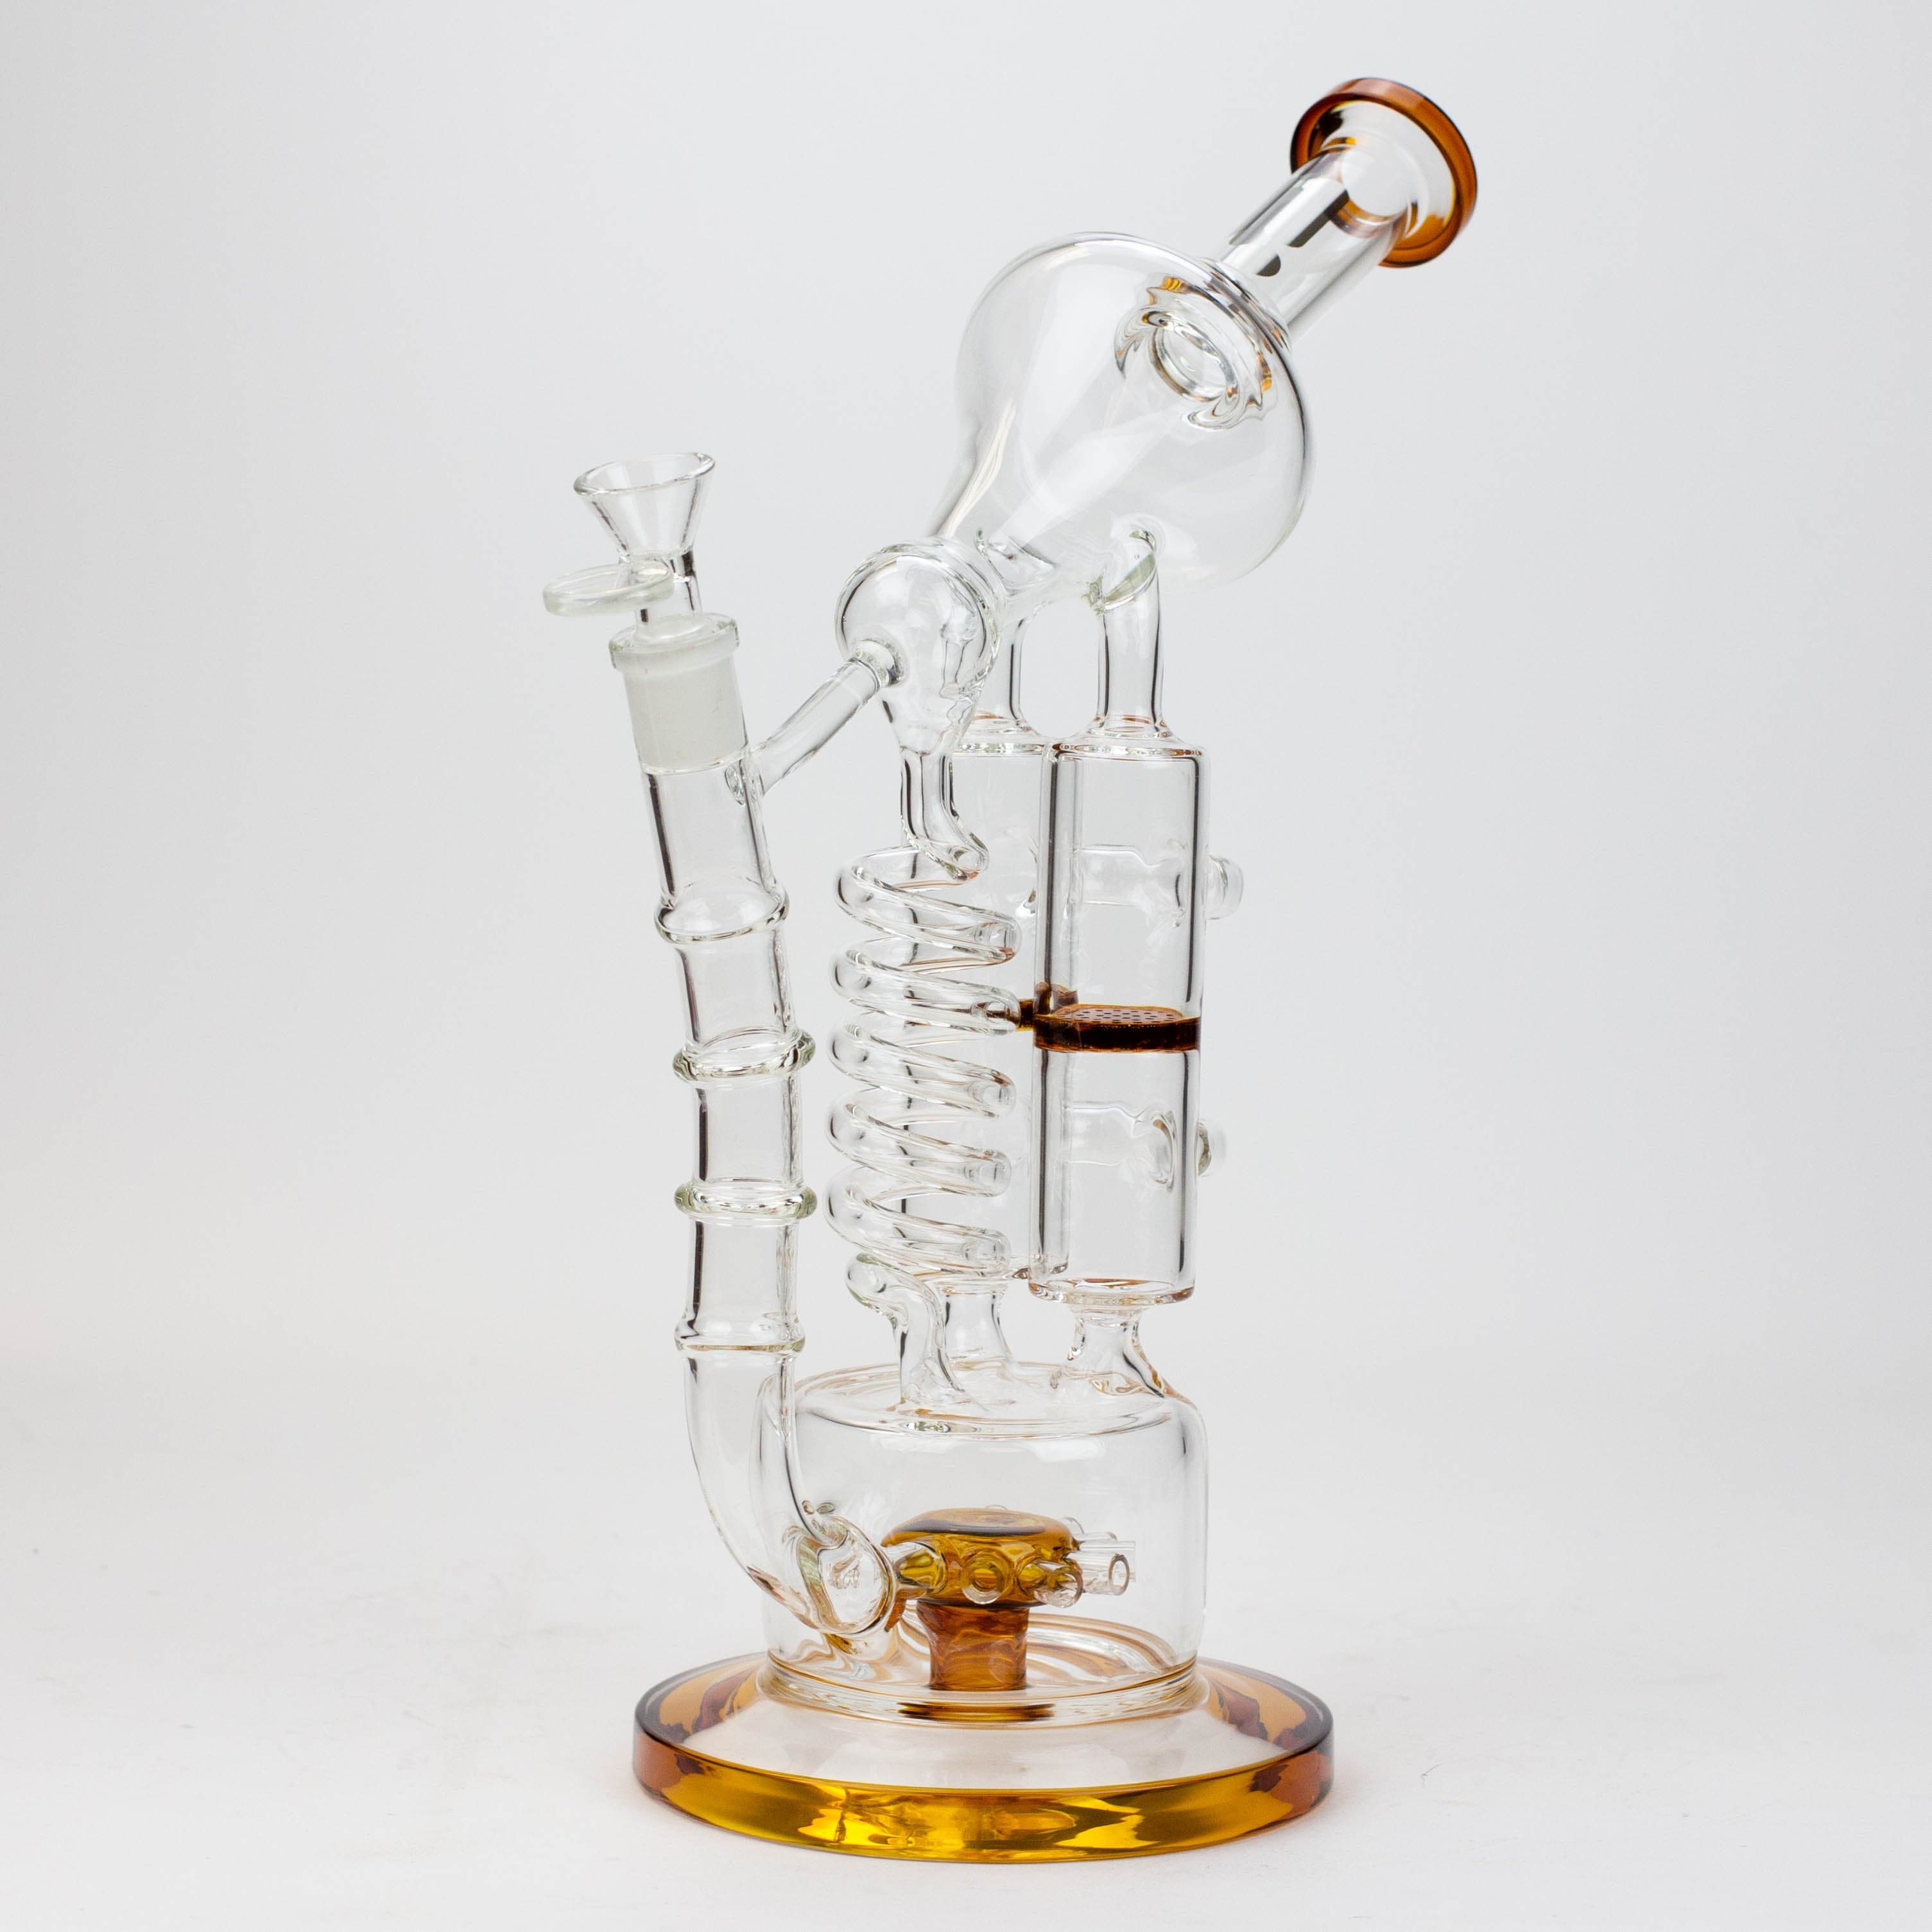 Infyniti coil, dual honeycome and flower diffuser glass recycler pipes 13"_4